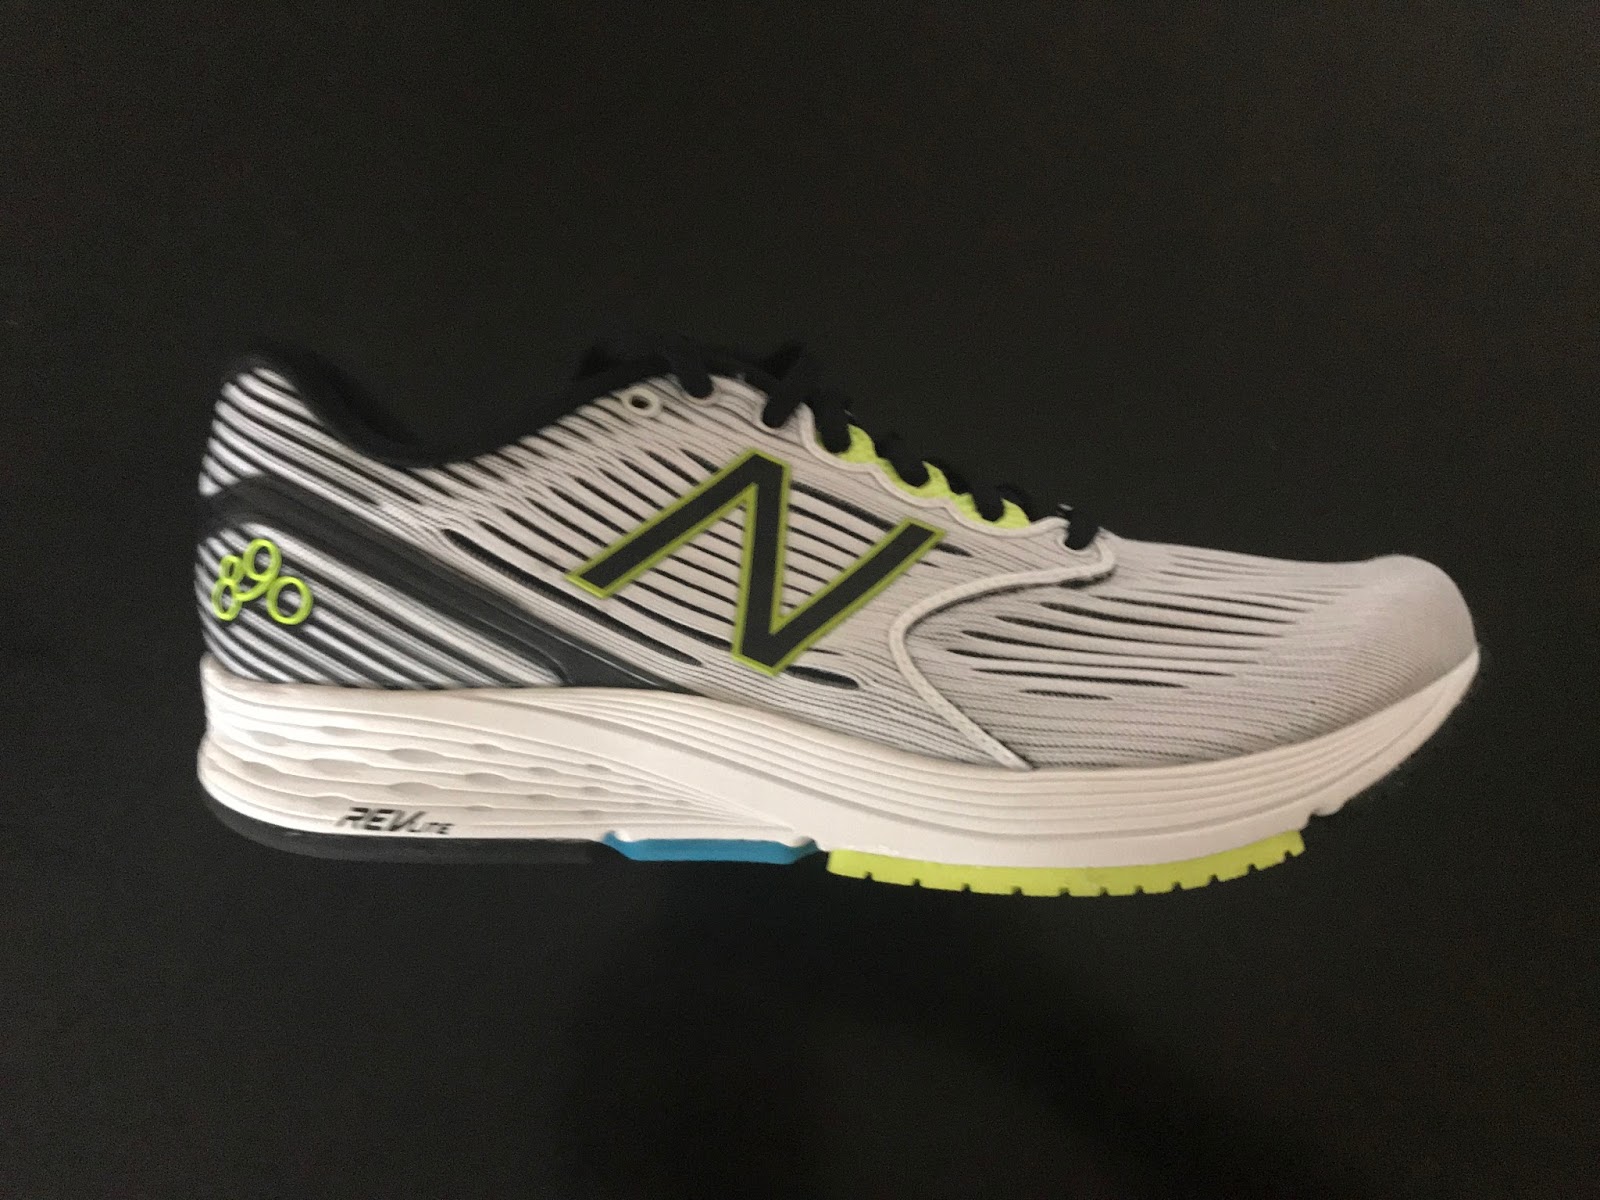 Road Trail Run: New Balance 890v6 Review: A Stable